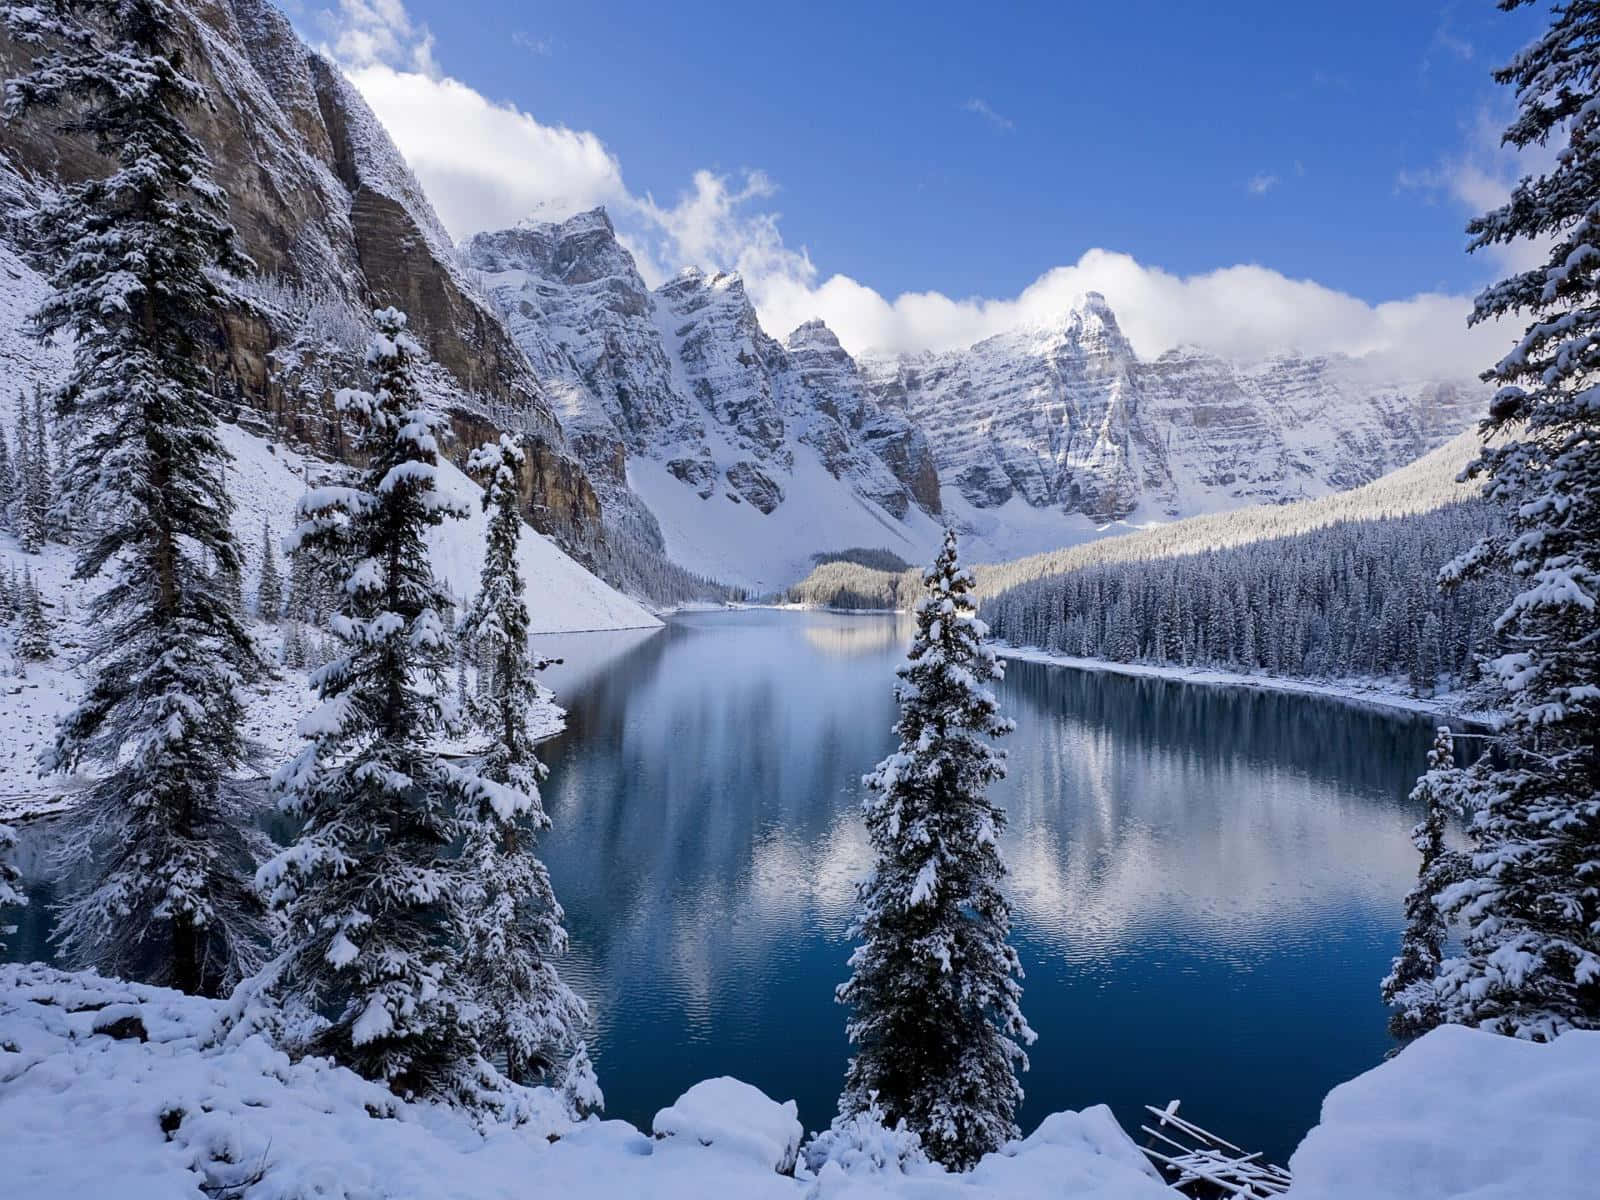 Enjoy the tranquility and beauty of a snowy landscape in high resolution